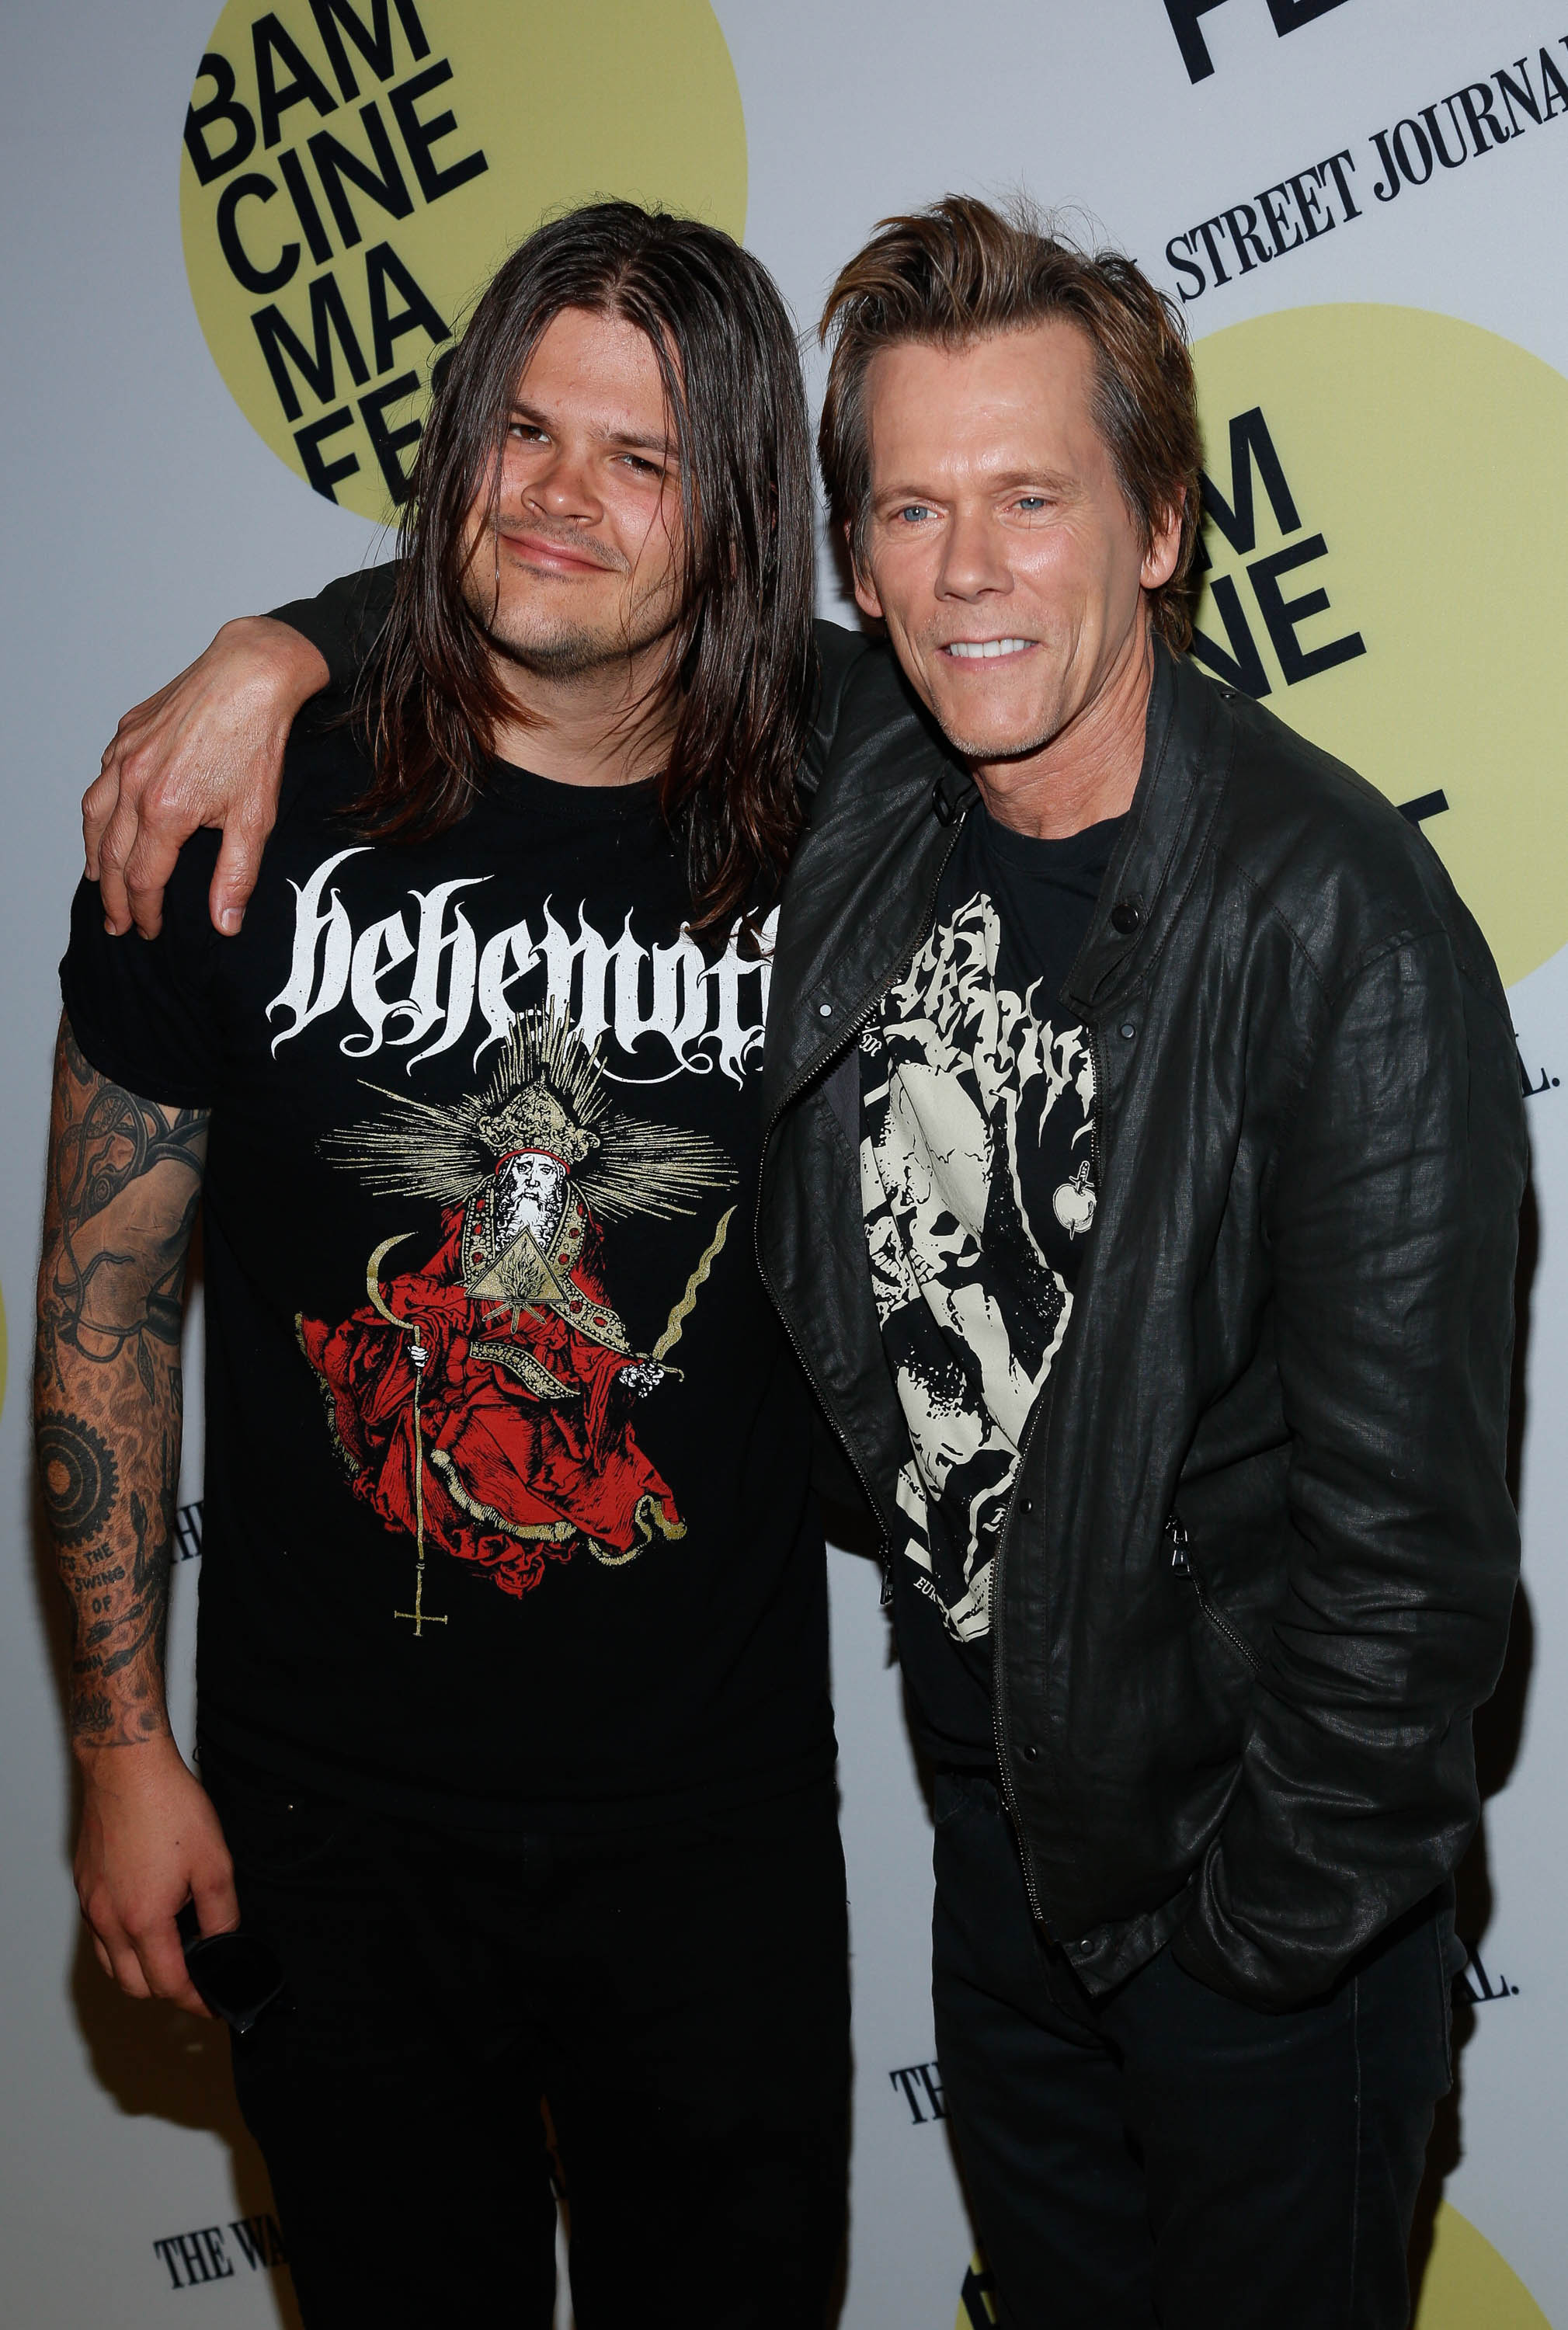 Kevin Bacon and son Travis Bacon at the premiere of "Cop Car" during BAMcinemaFest 2015 in New York City on June 21, 2015. | Source: Getty Images